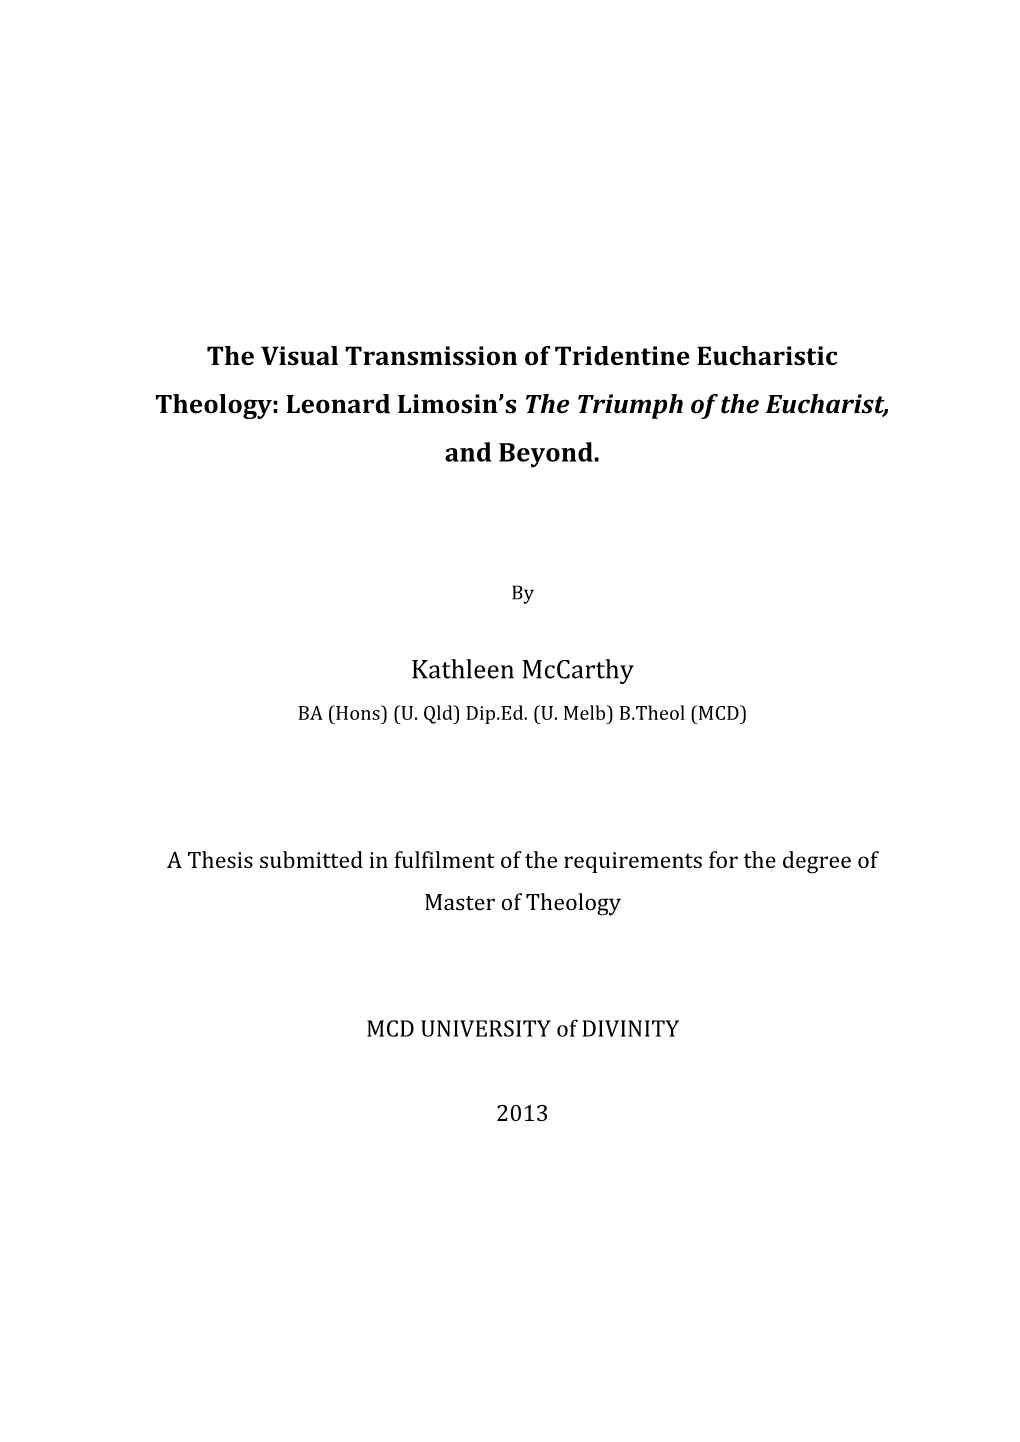 Leonard Limosin's the Triumph of the Eucharist, and Beyond. Kathle